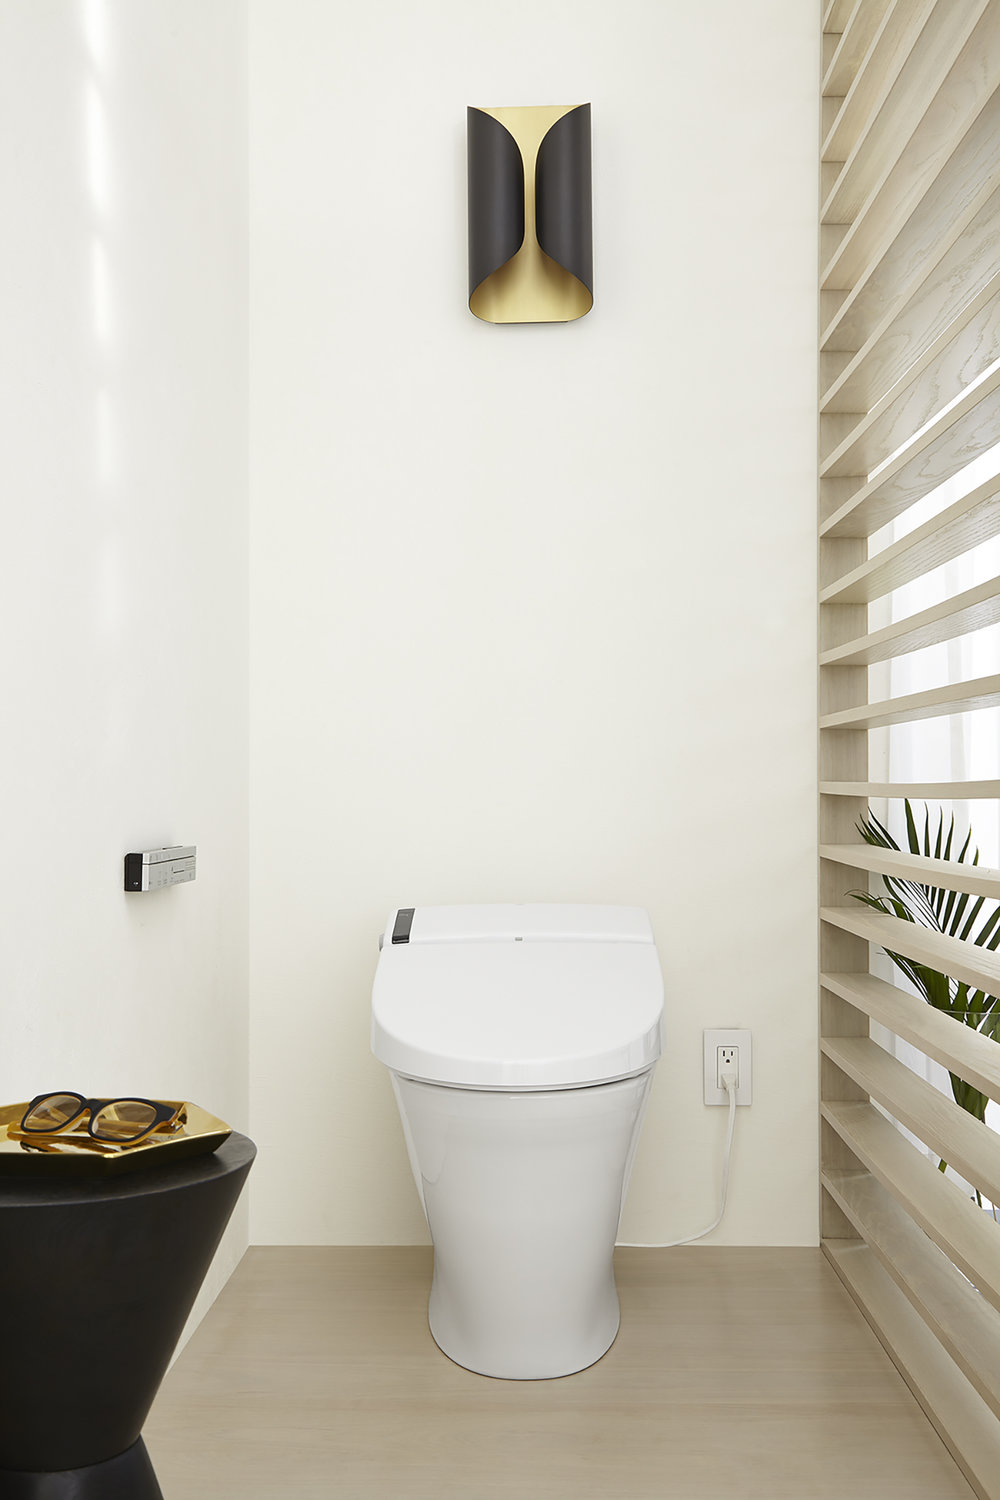  This spectacular piece of technology is a toilet and bidet in one (It also includes an air freshener — not kidding). Meet the  SpaLet AT200 toilet.  